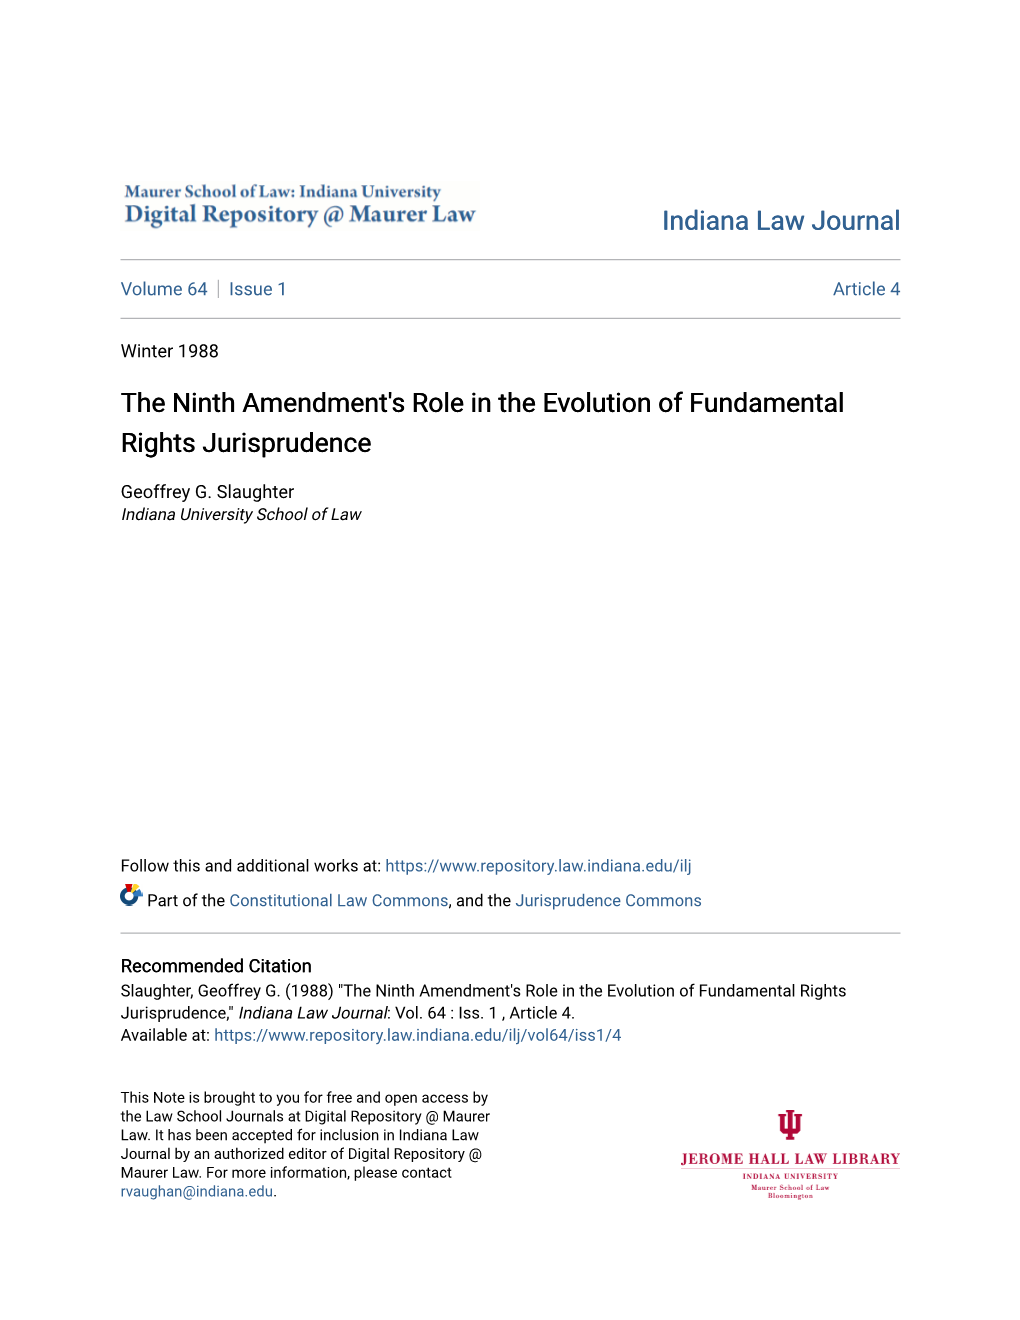 The Ninth Amendment's Role in the Evolution of Fundamental Rights Jurisprudence